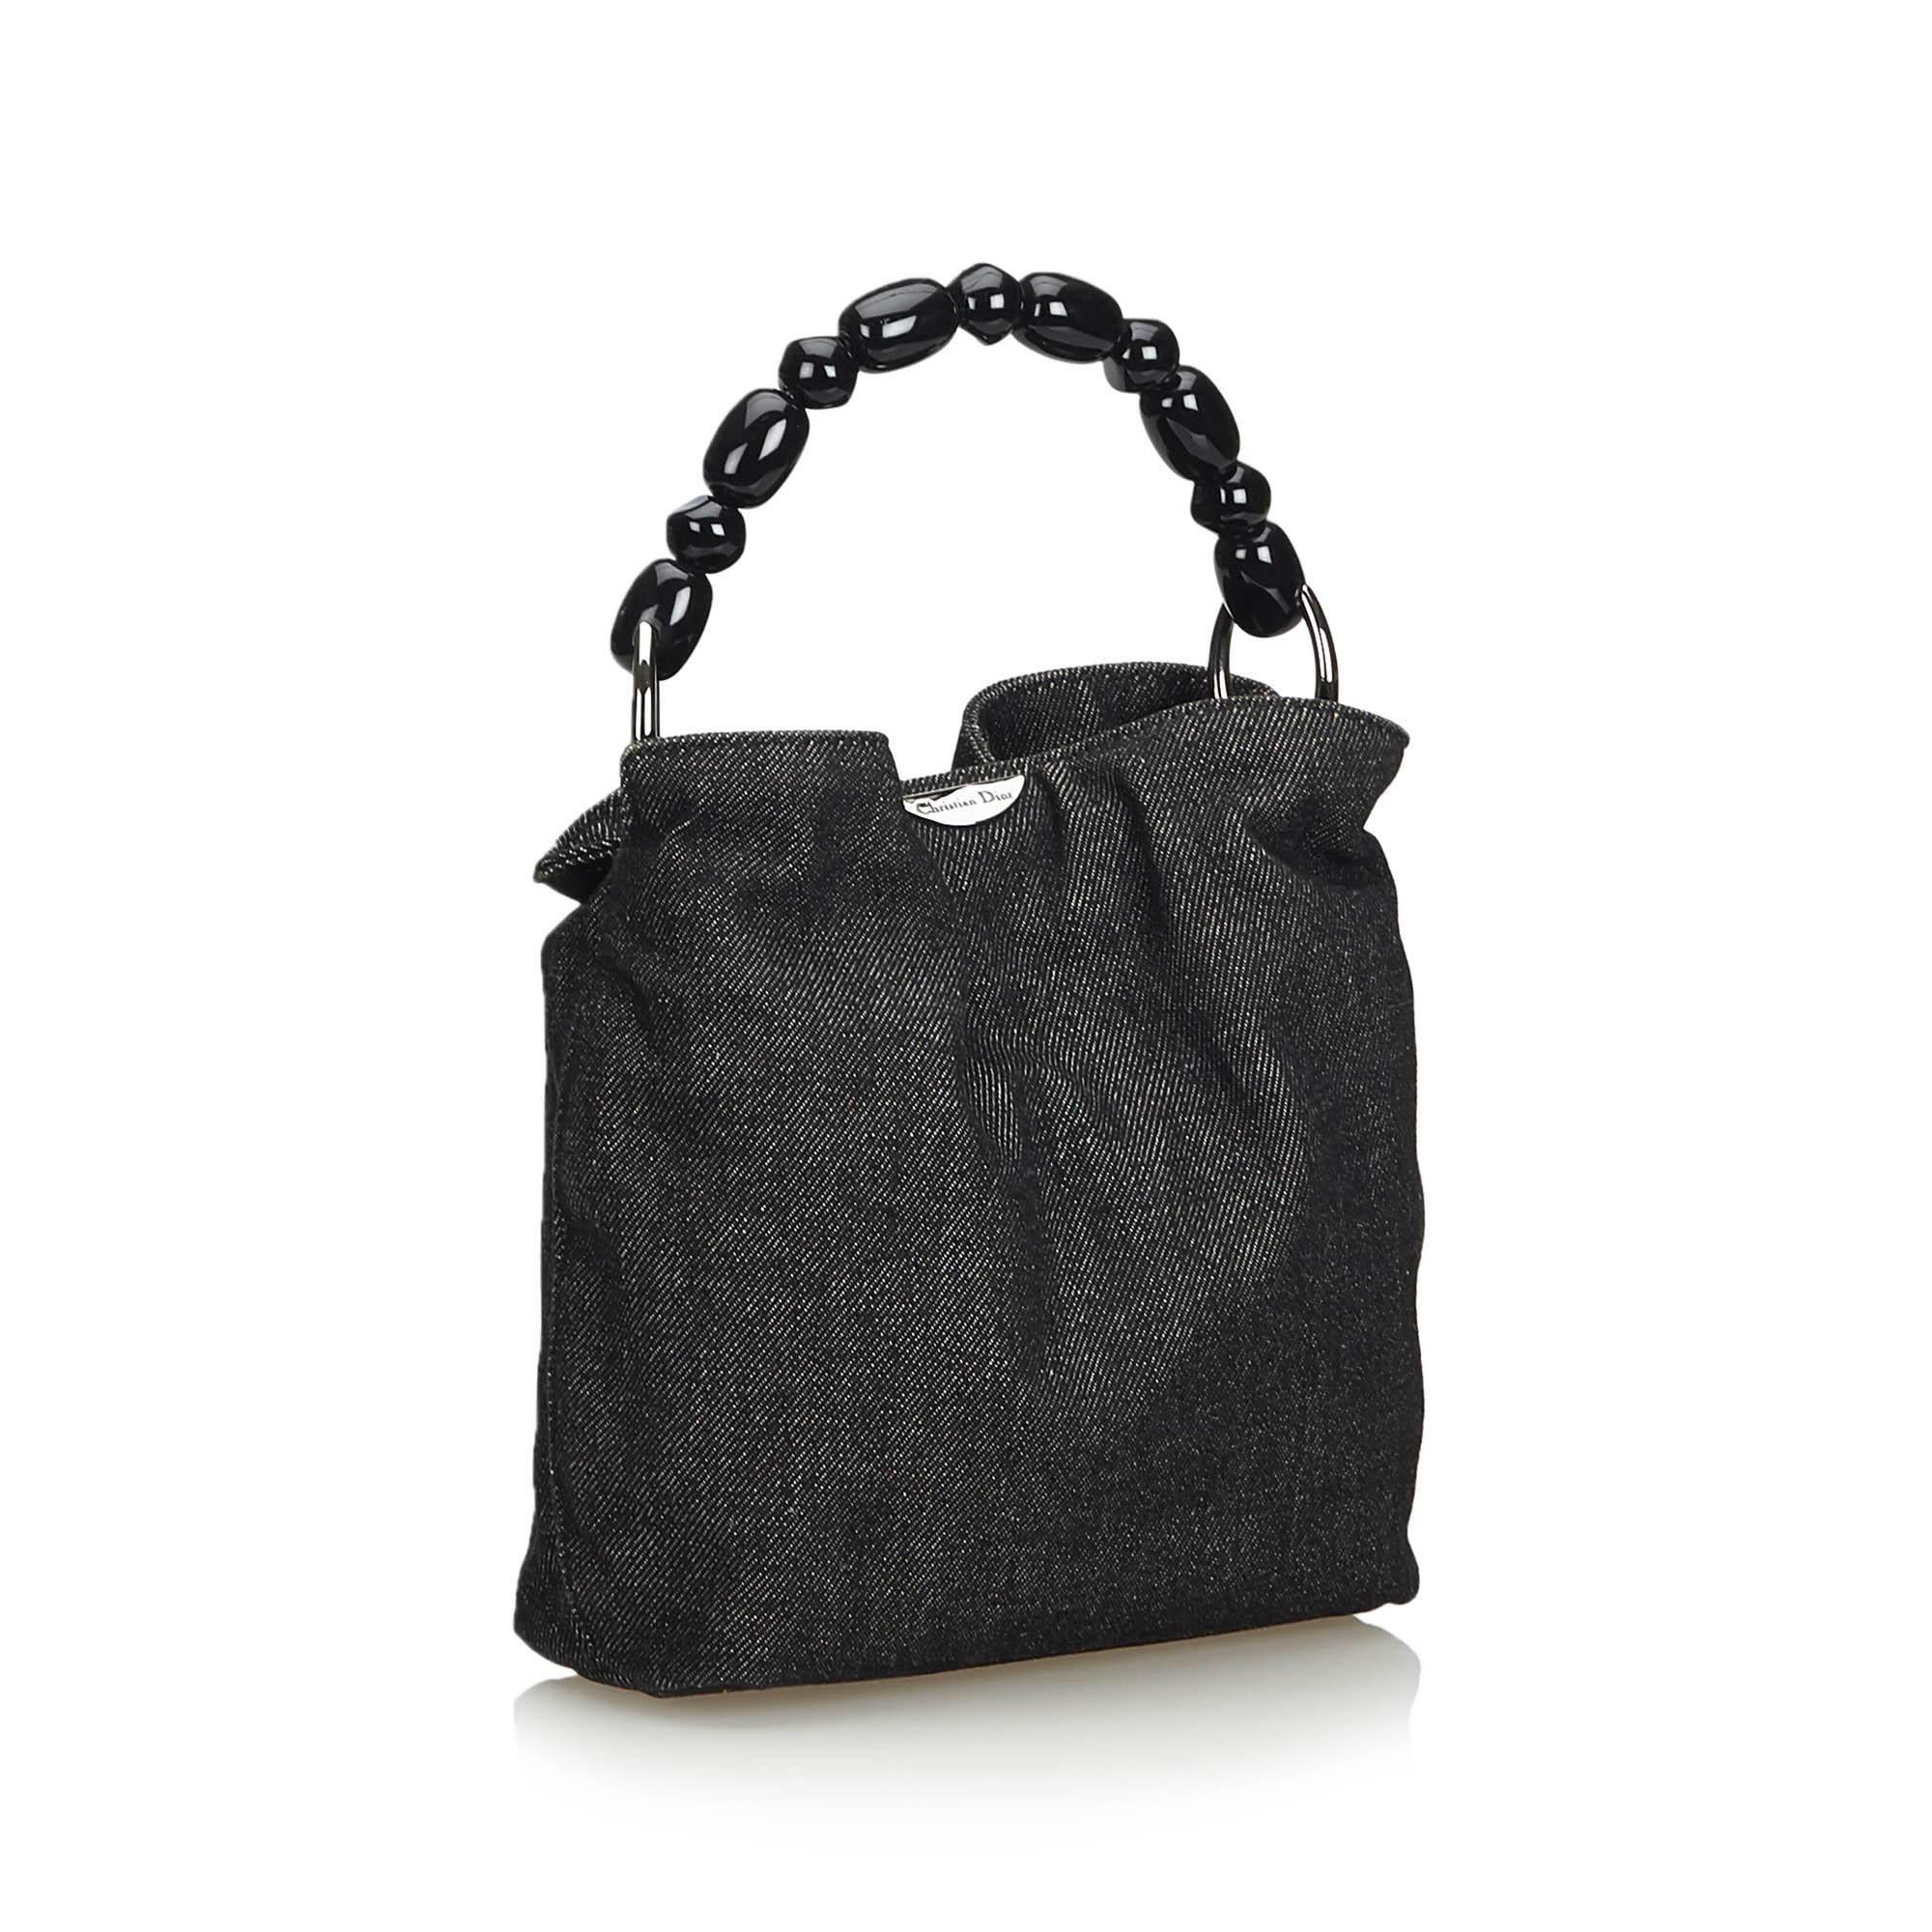 The Malice handbag features a denim body, a plastic handle in pearl detail, an open top with a magnetic closure, and an interior slip pocket. It carries as AB condition rating.

Inclusions: 
This item does not come with